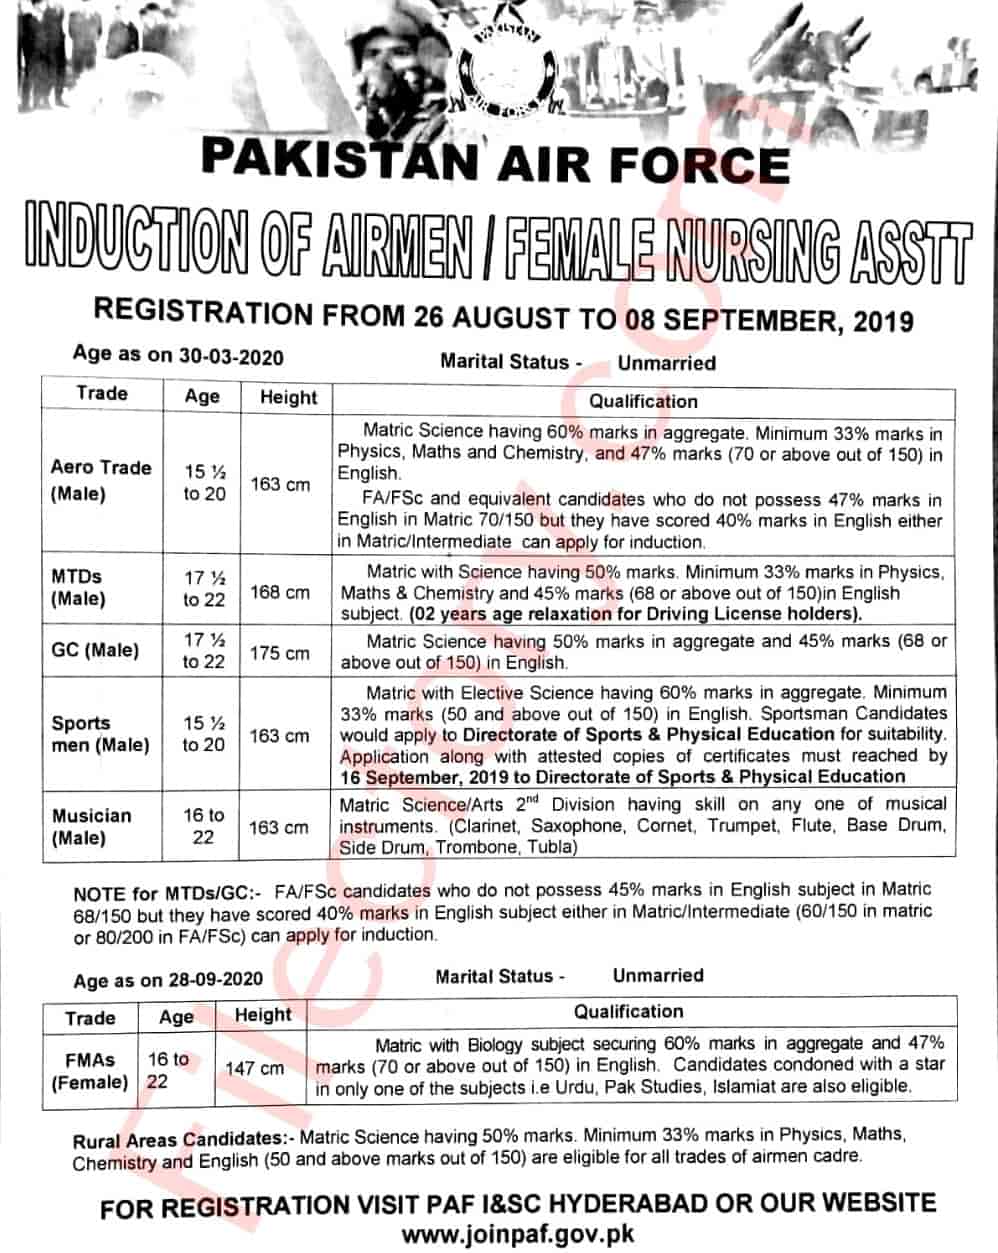 Join Pakistan Air Force Paf As Airman Www.joinpaf.gov.pk Jobs 2019 Advertisement Online Registration Entry 2003